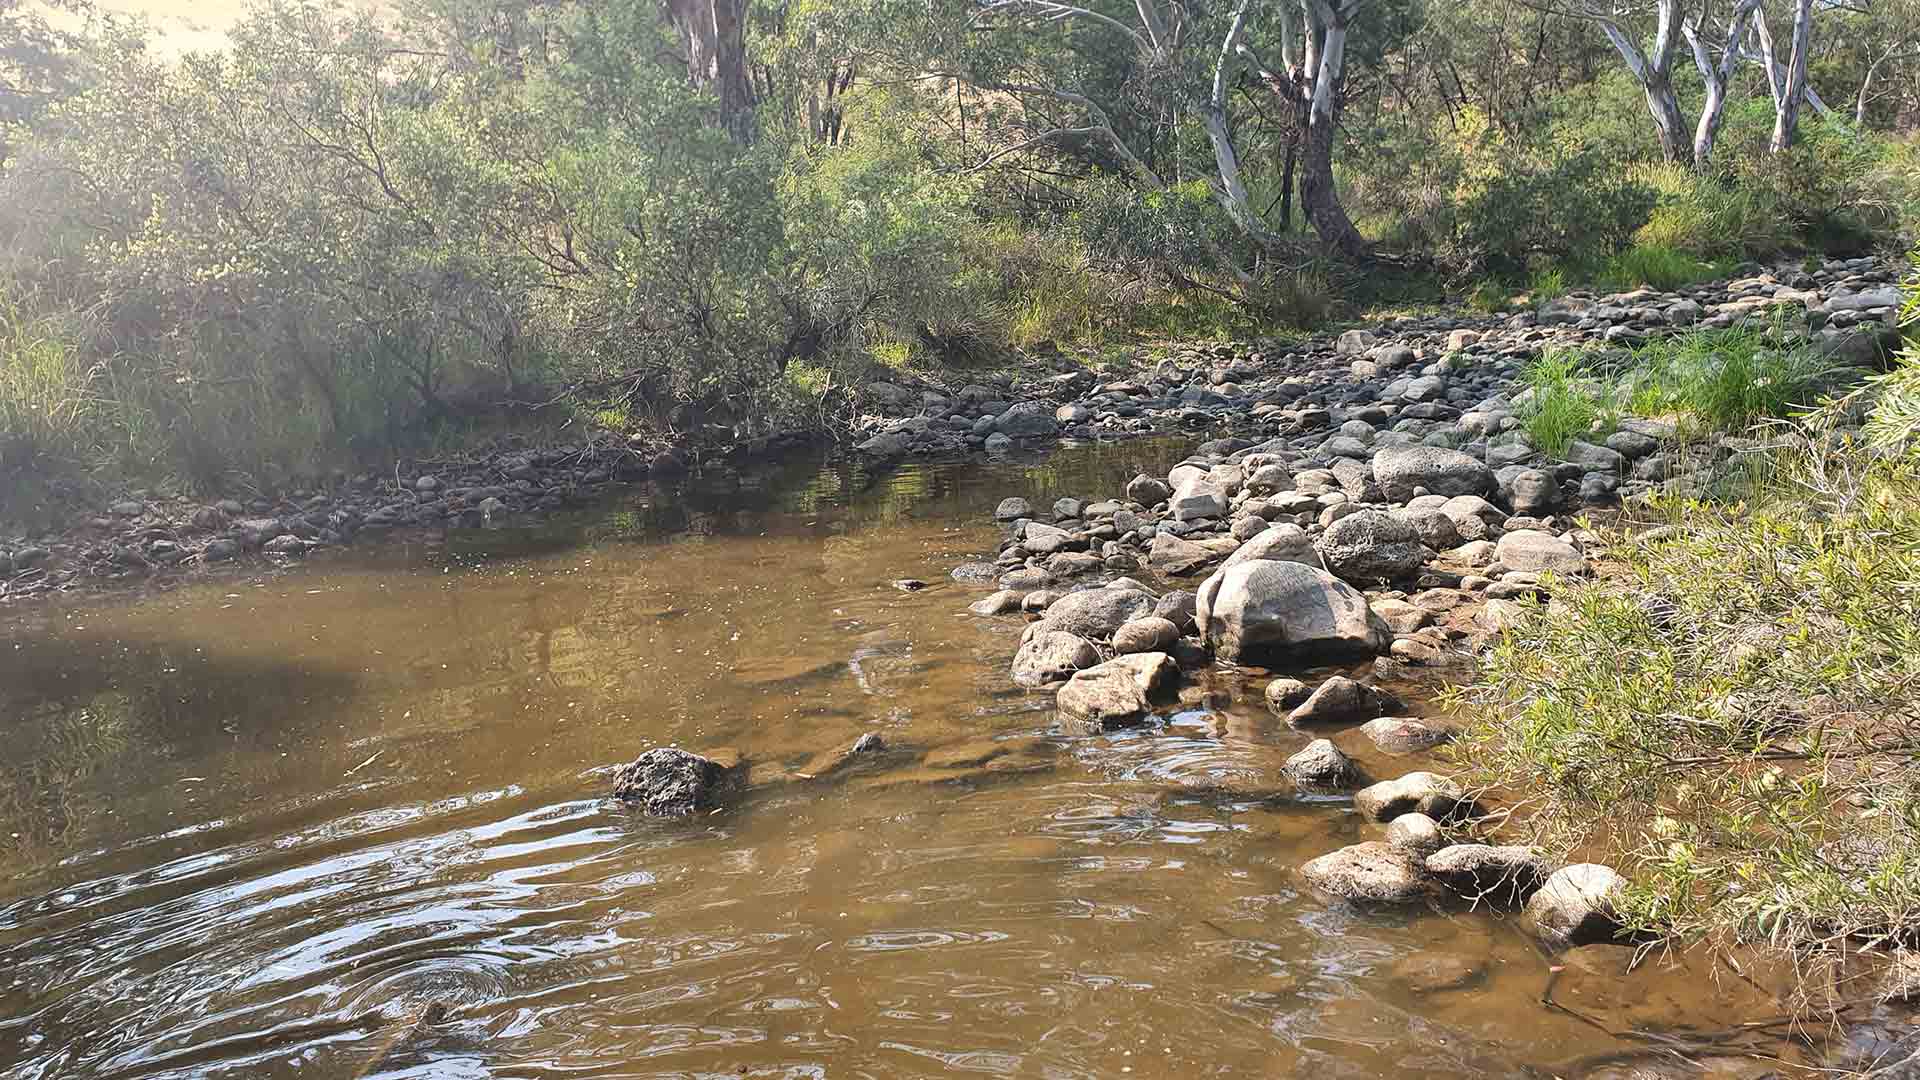 Campaspe River with rocks along the side